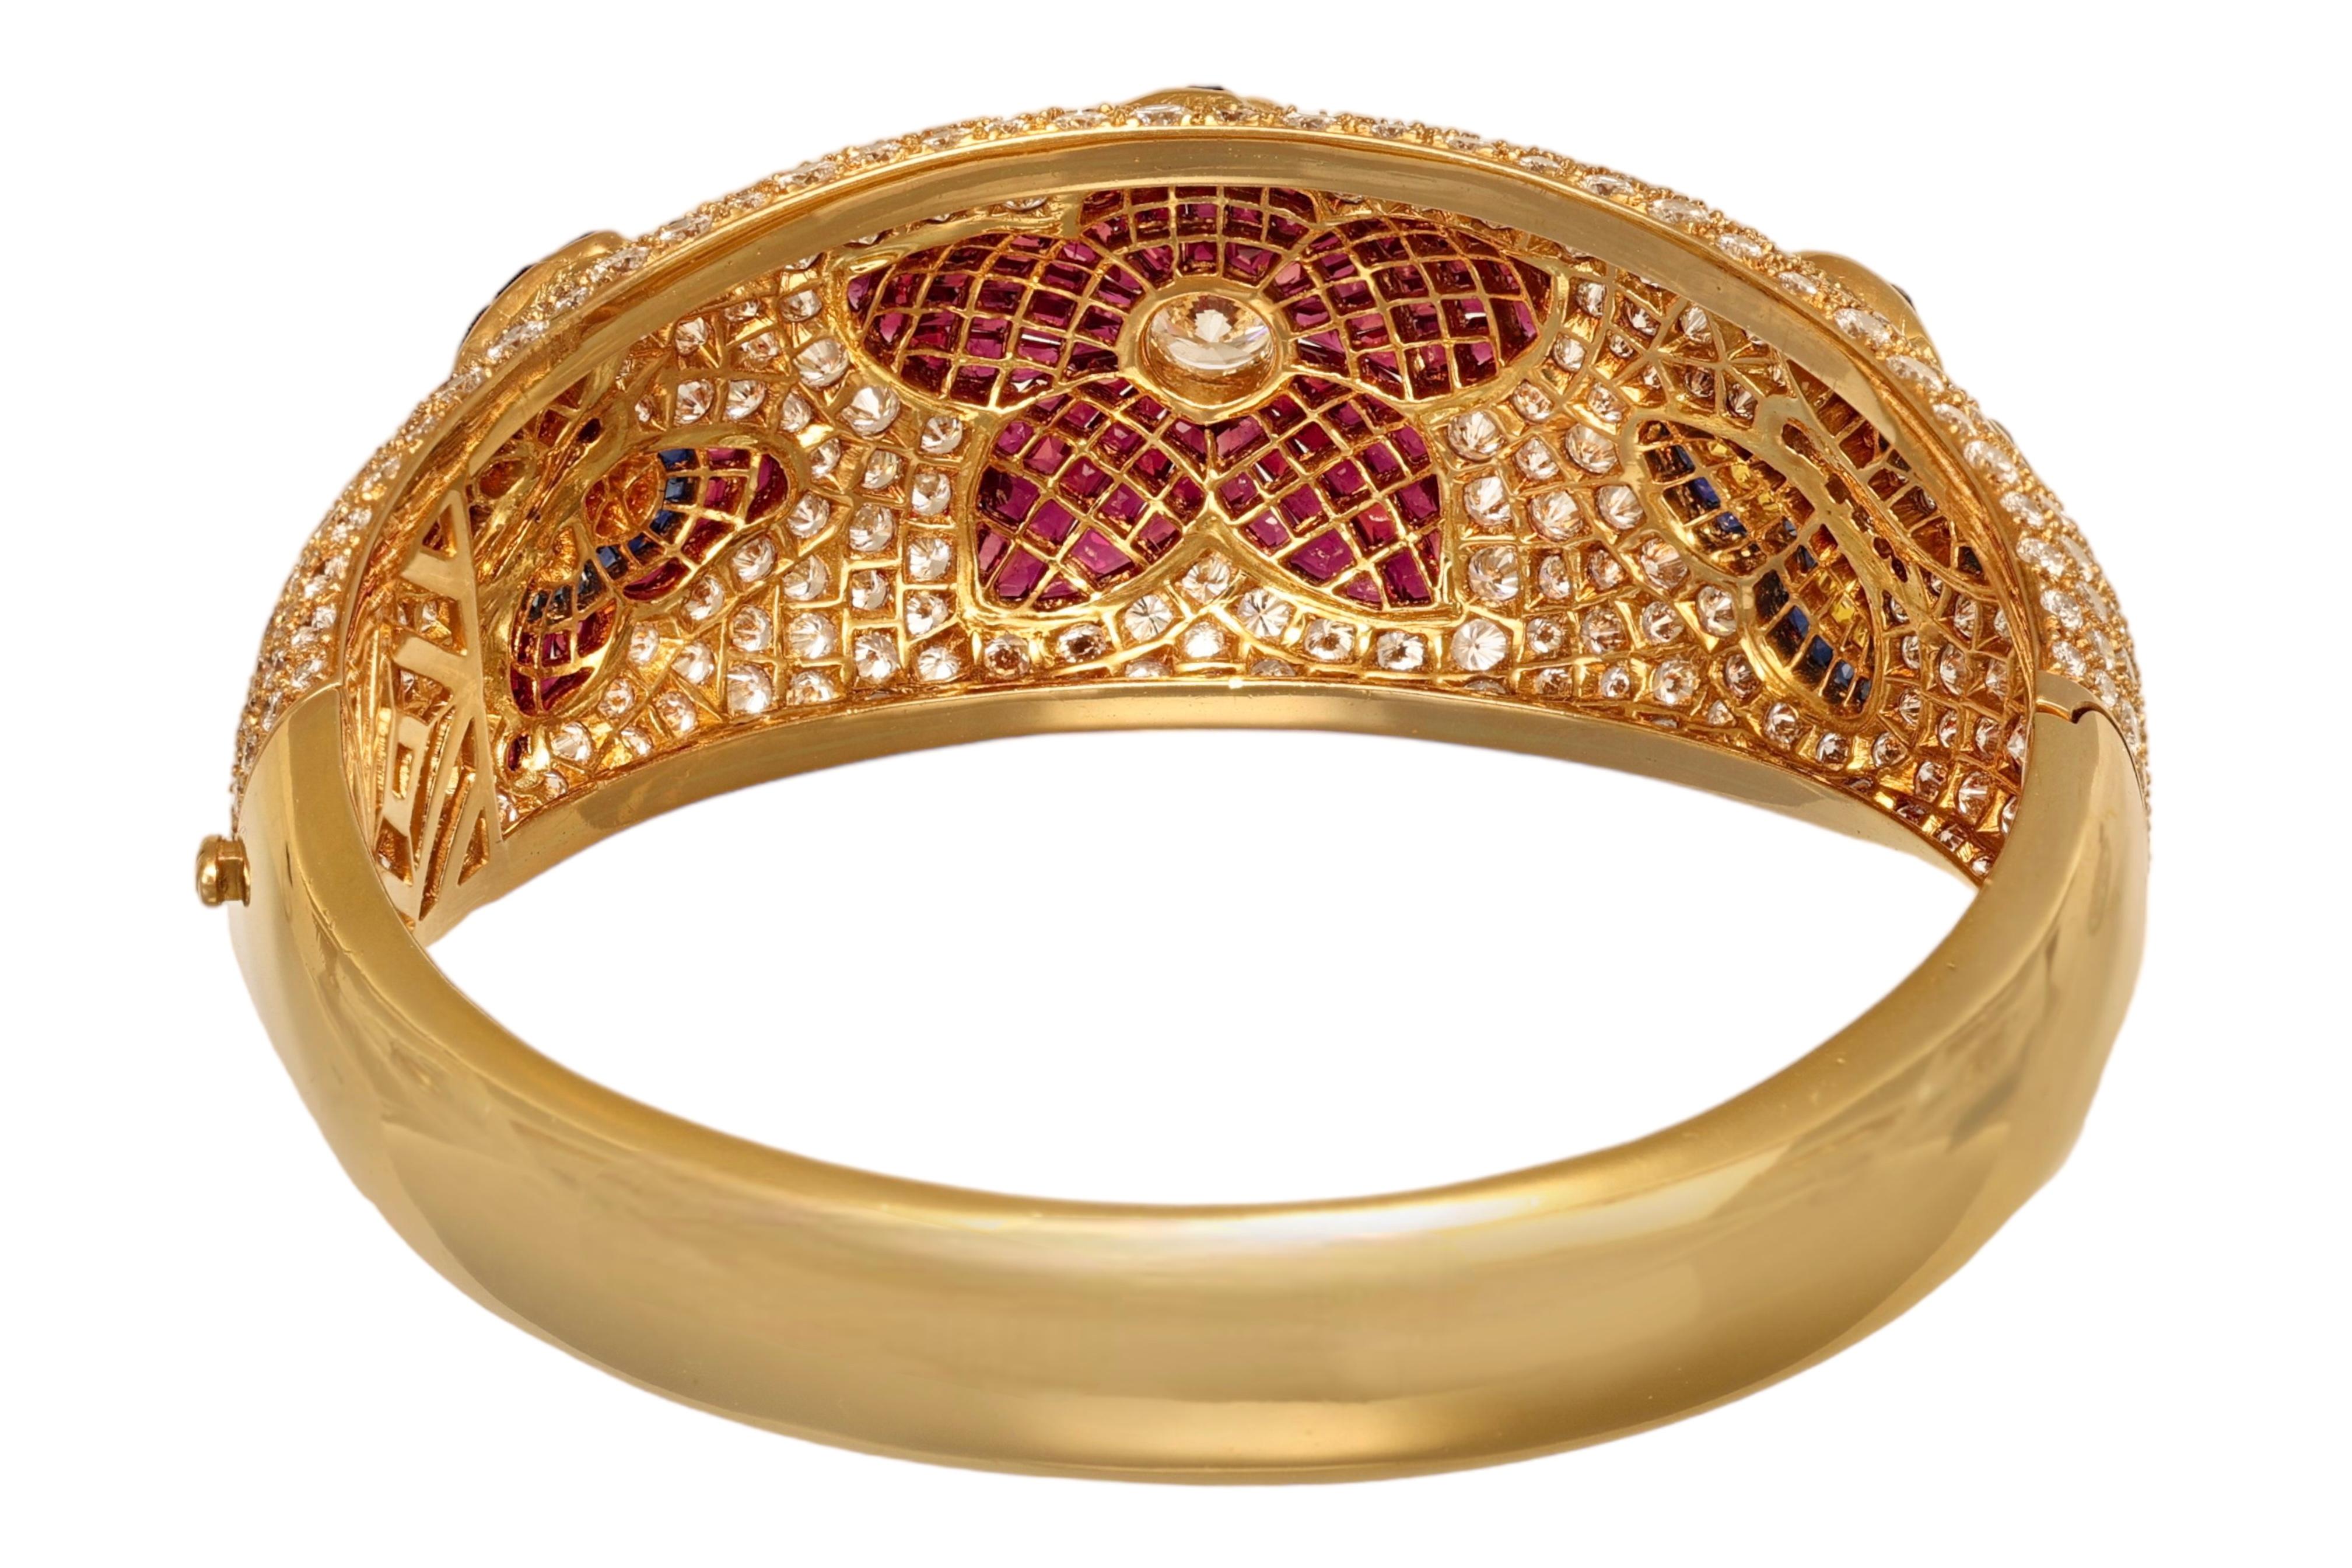 18 kt. Yellow Gold Wide Bangle Bracelet With Diamonds, Rubies, Sapphires For Sale 5